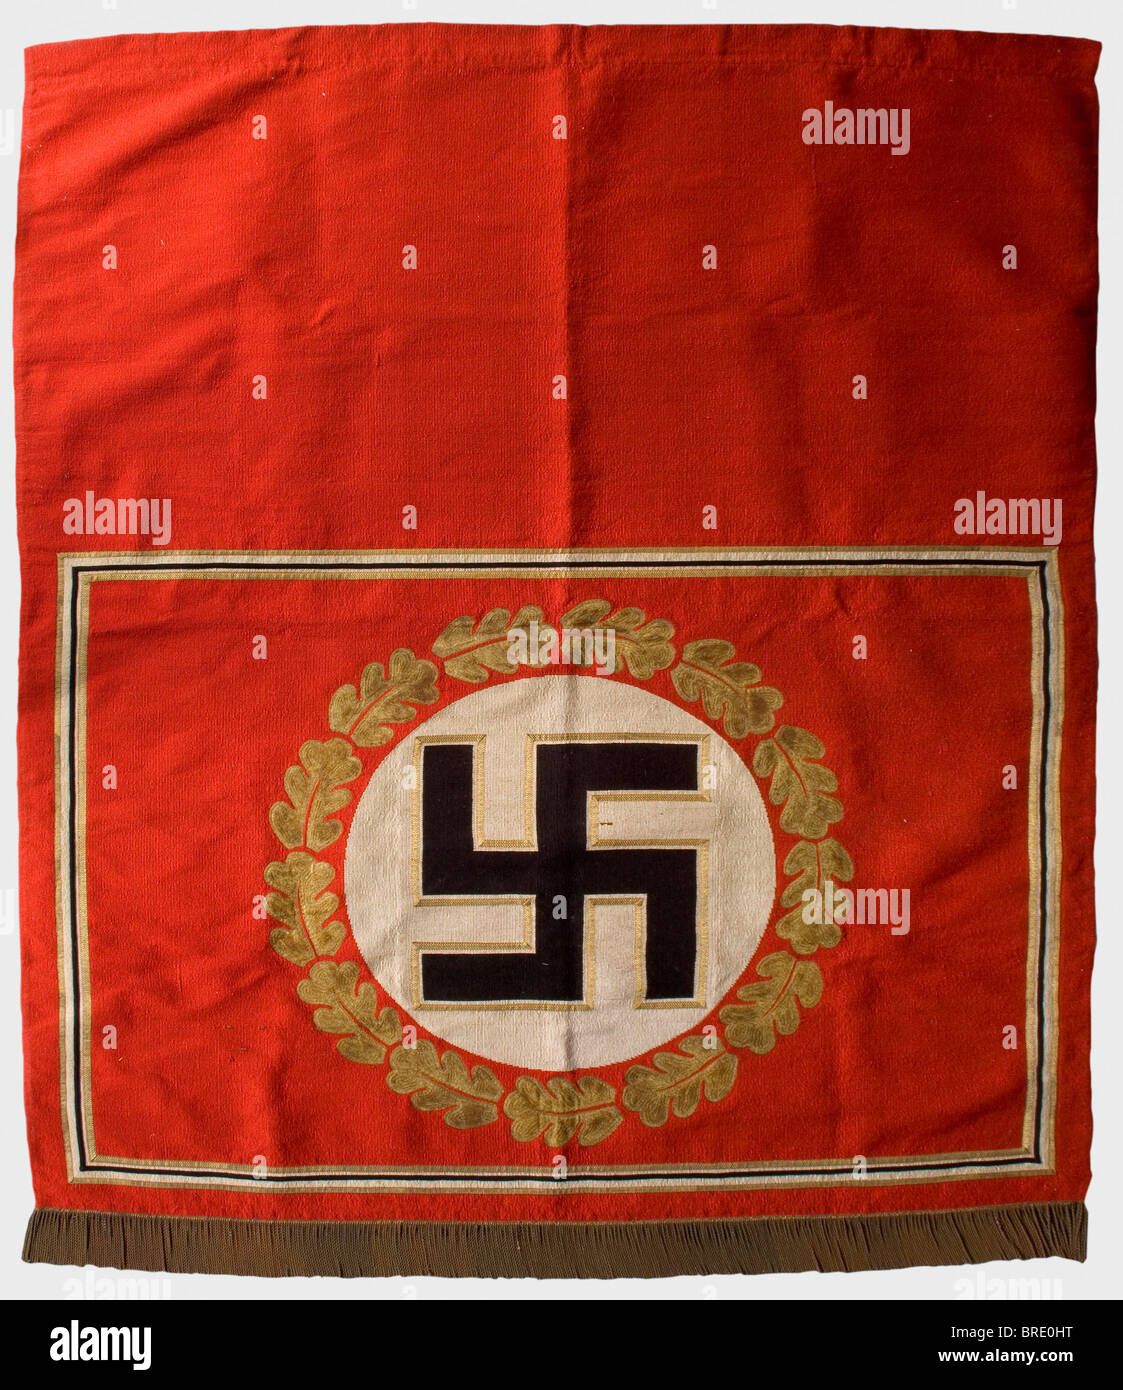 Adolf Hitler - a tapestry, from the Brown House in Munich Heavy version made of red fabric, in the centre a gold-bordered, upright black swastika in a white disc surrounded by gold oak leaf embroidery. Rectangular, black-white-golden border. Fringe trim on the lower edge. The upper edge with a broad hem, inside a sleeve for the wall hanging rod. Small damages, the red silk backing with repairs. Size 220 x 190 cm. From a series of tapestries from Adolf Hitler's personal meeting room in the party building complex 'Braunes Haus' in Munich, Briennerstr. 45. Cf. Her, Stock Photo